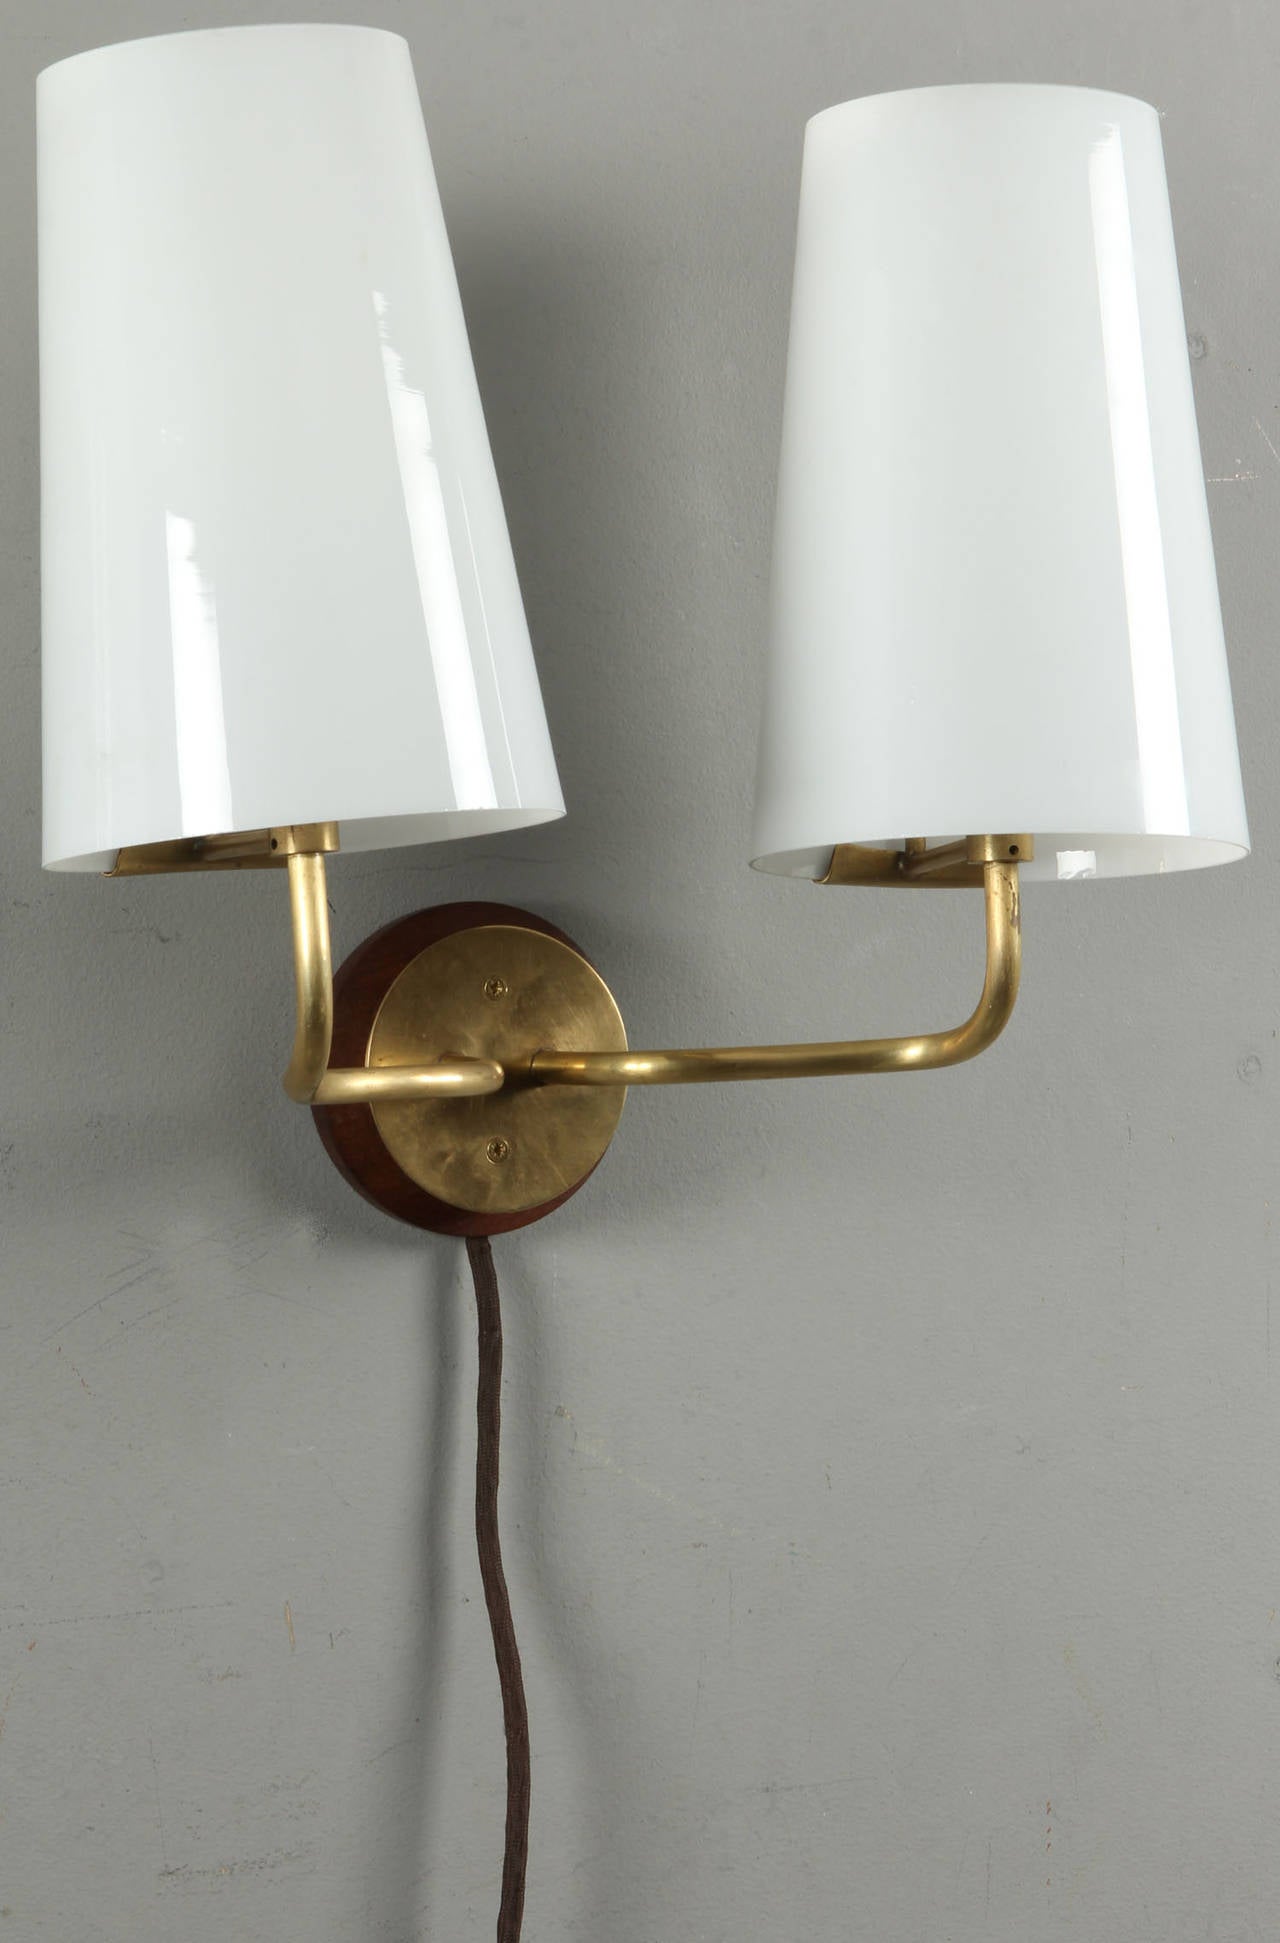 Danish Wall Light by Fog & Mørup/ 2 available